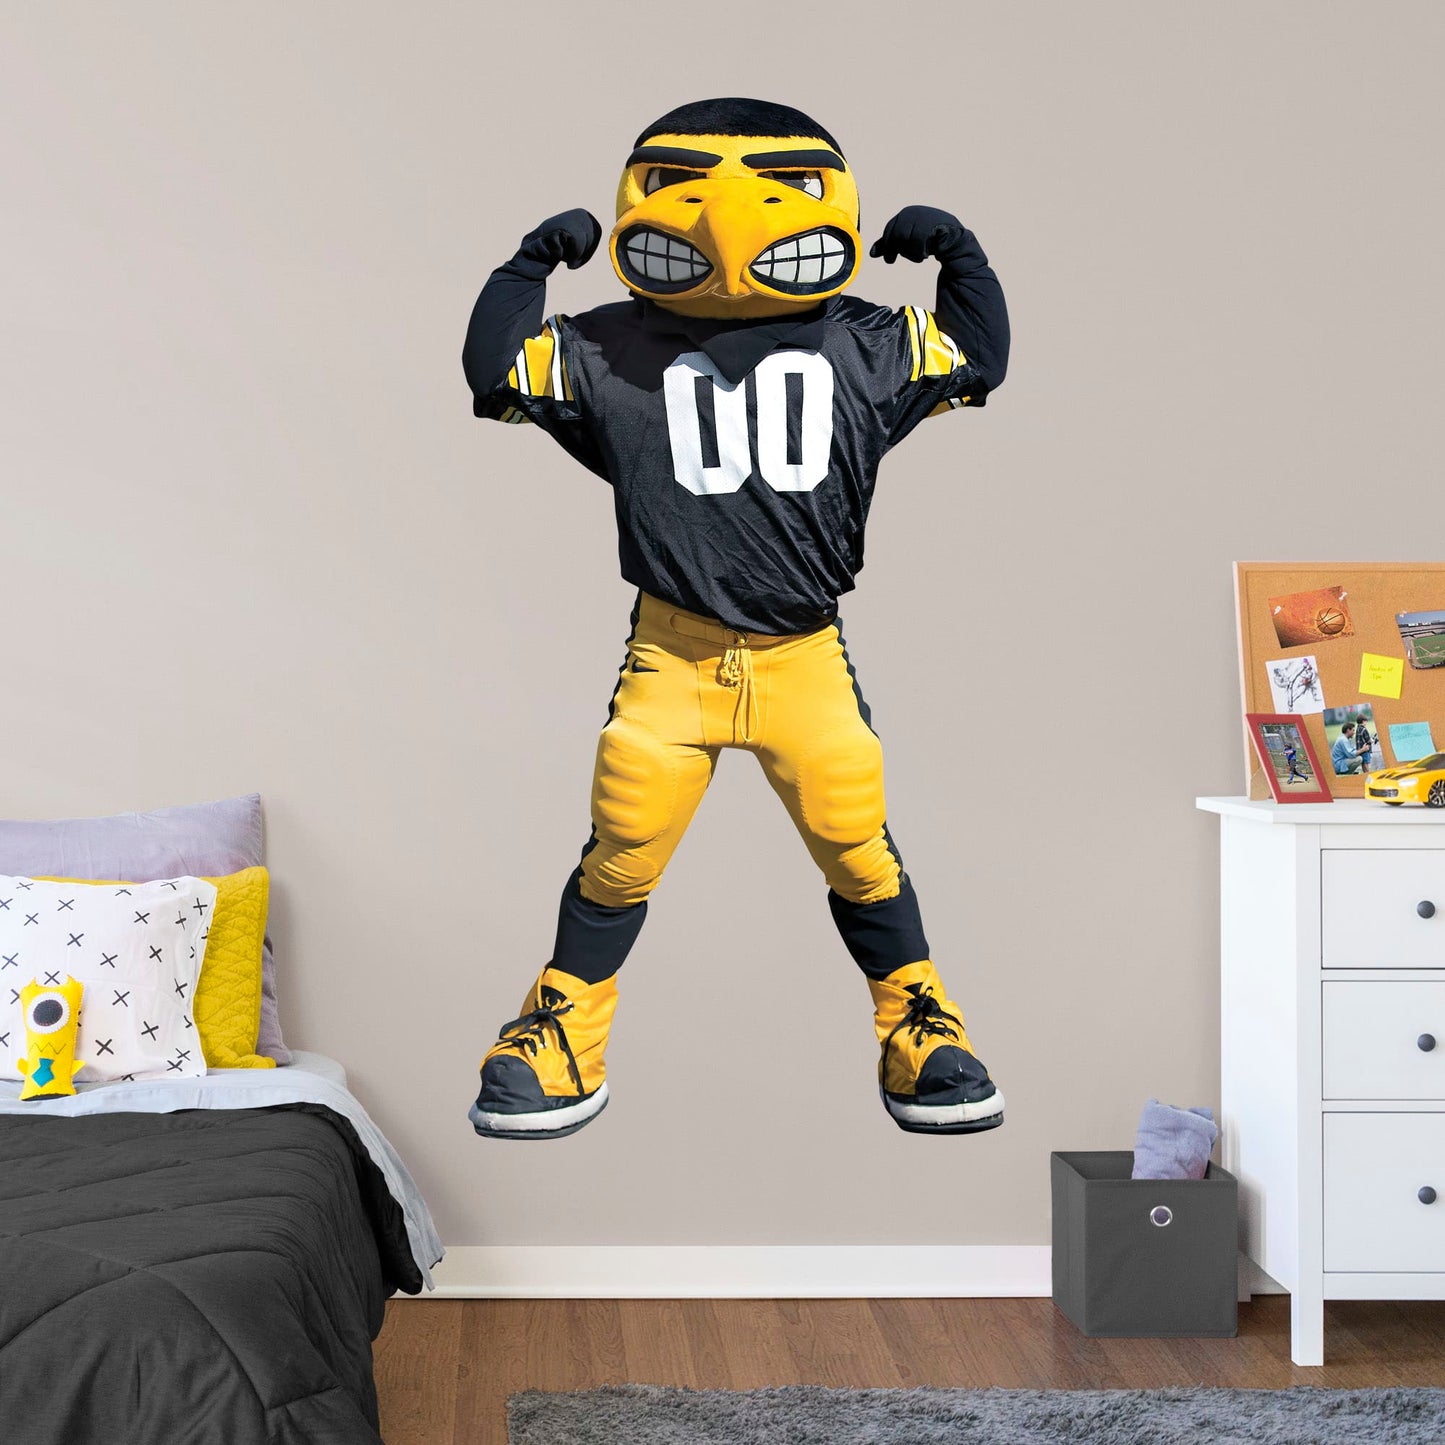 Life-Size Character + 1 Decal (40"W x 77"H)